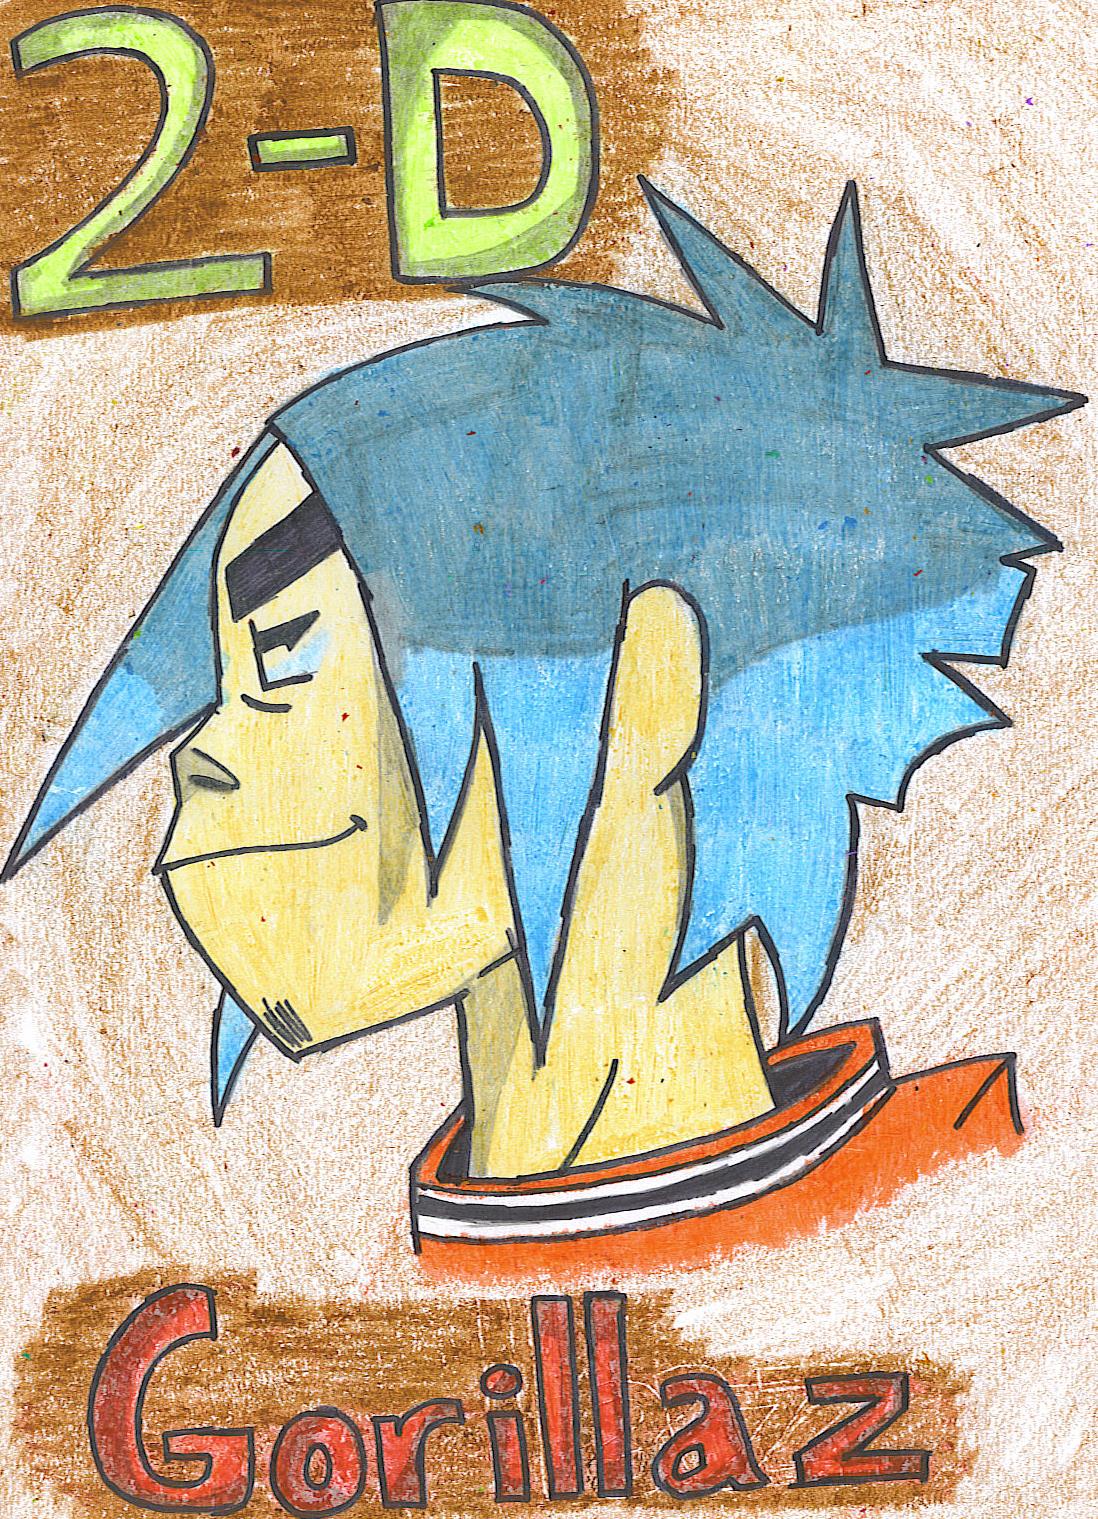 D-Gorillaz by Yami_And_The_Fallen_Angel